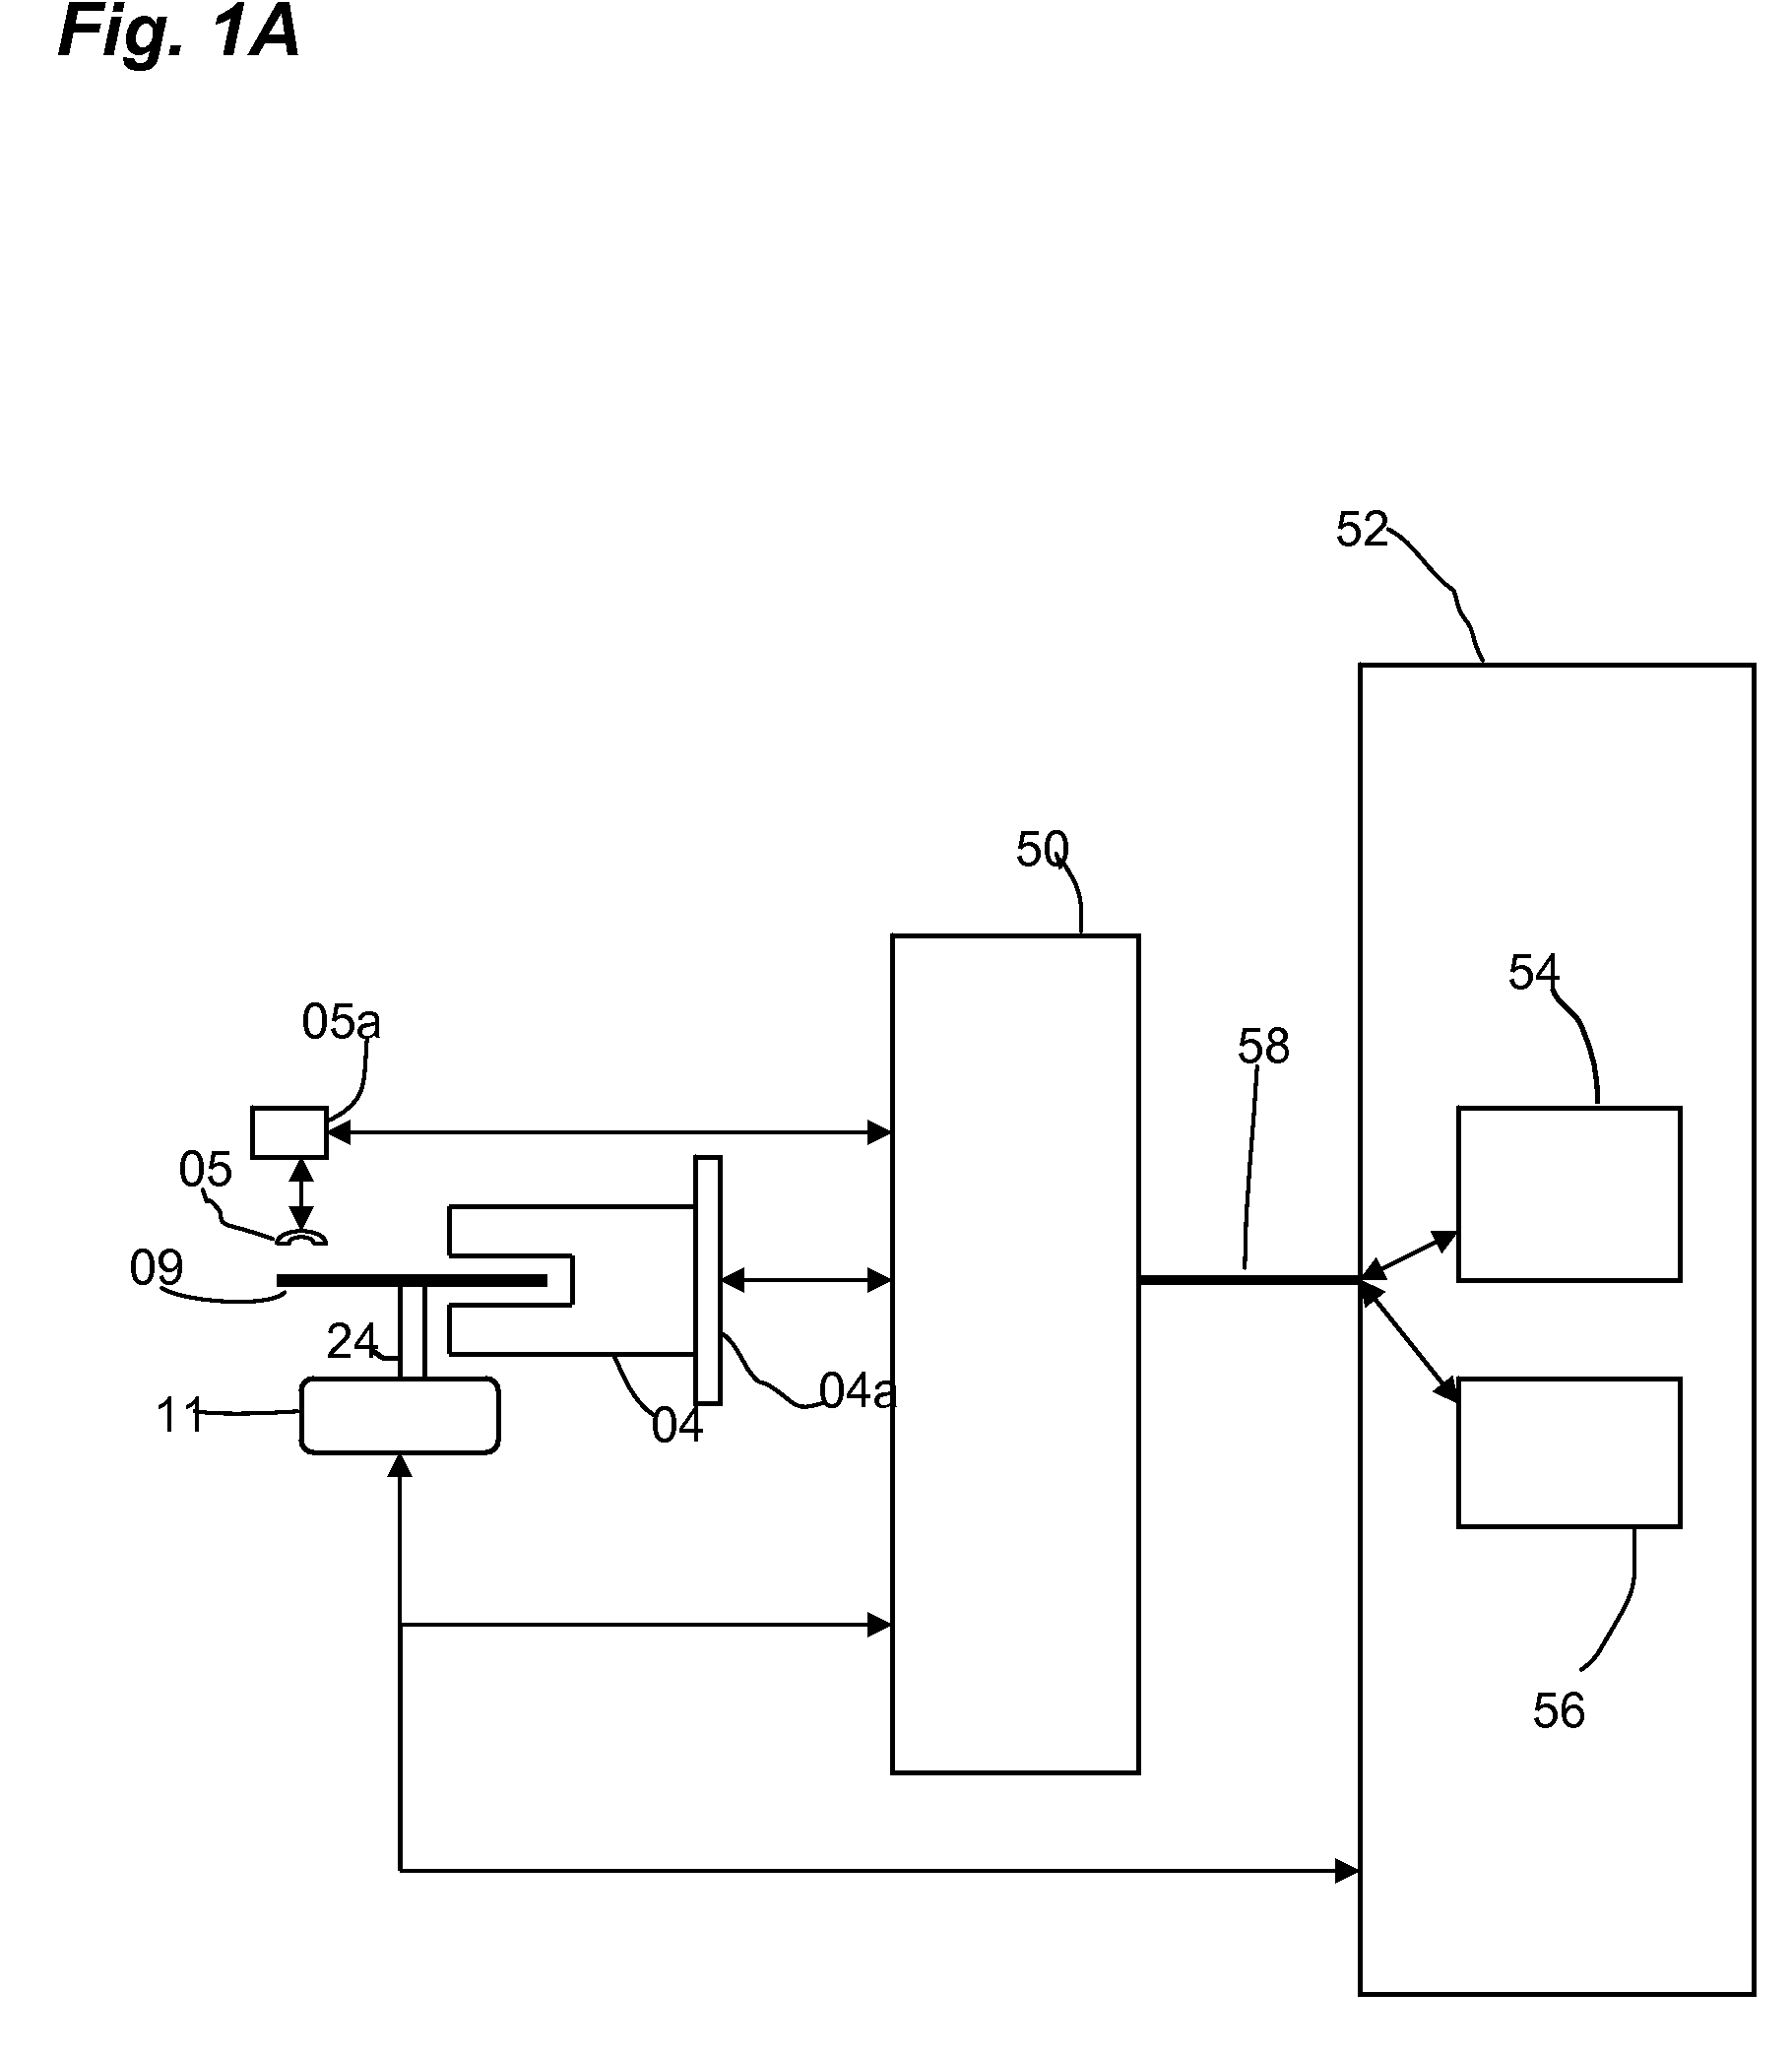 Method and System for Perpendicular Magnetic Media Metrology